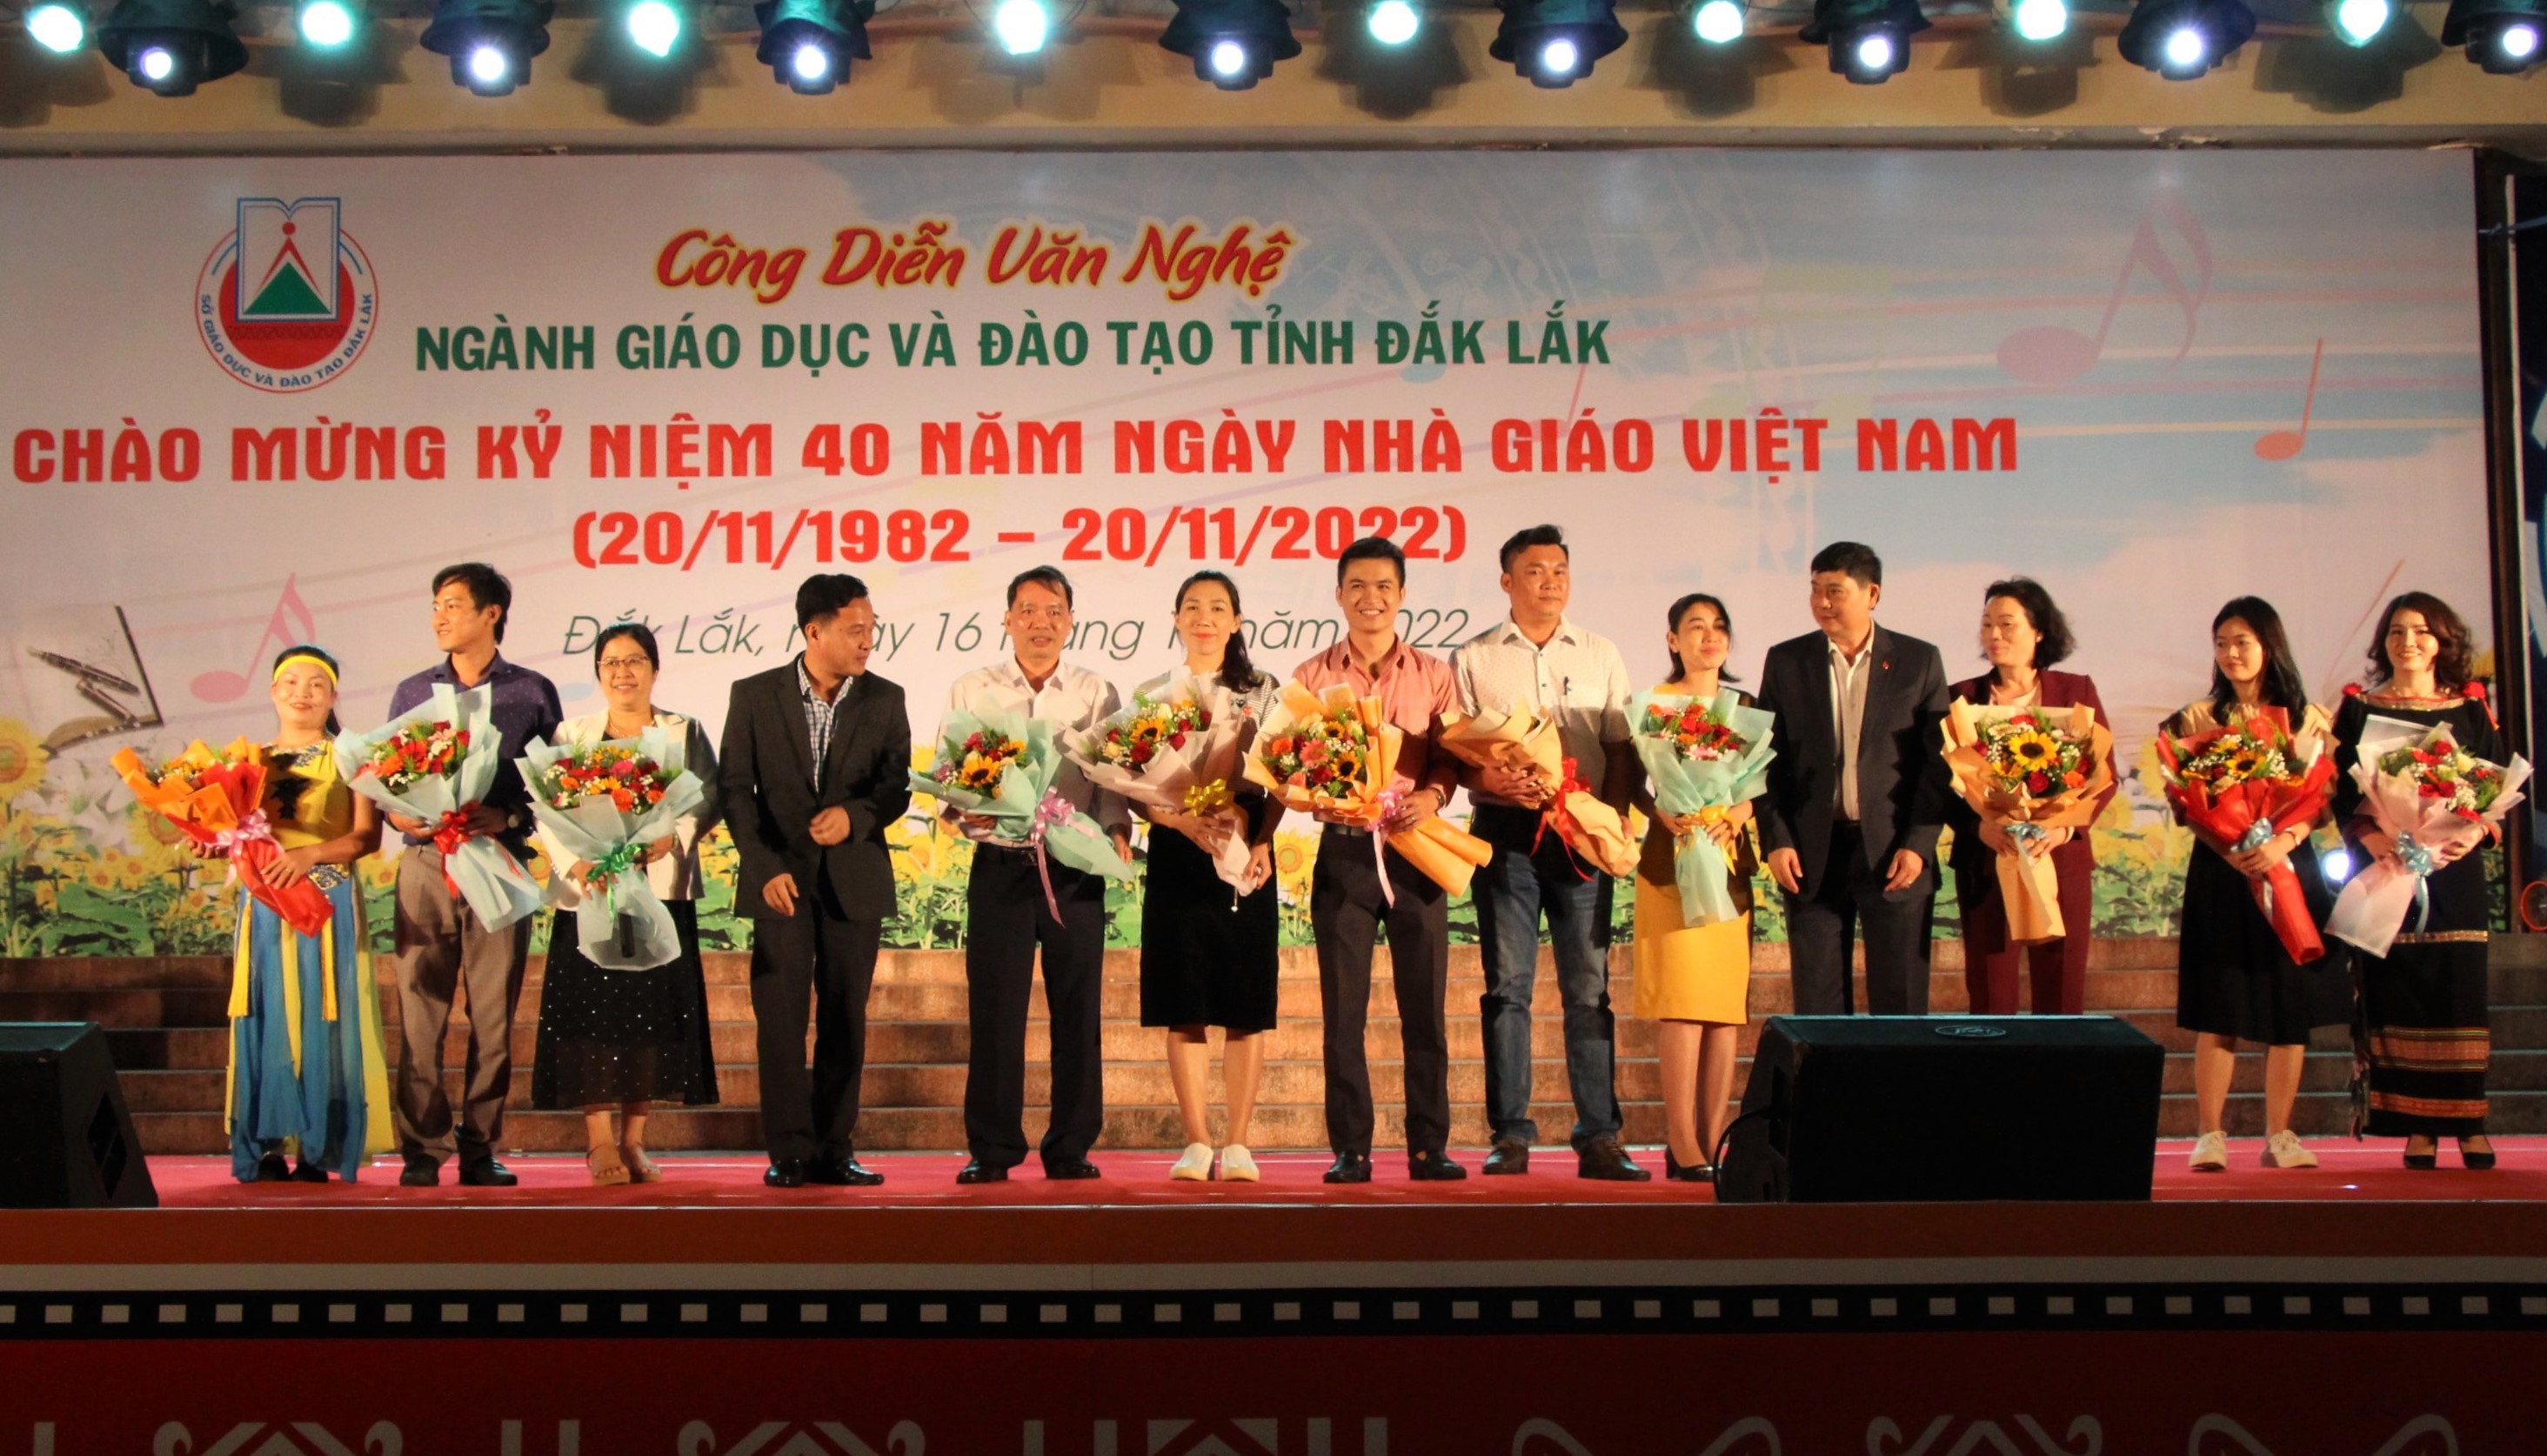 Performance Show of the Education and Training Sector of Dak Lak